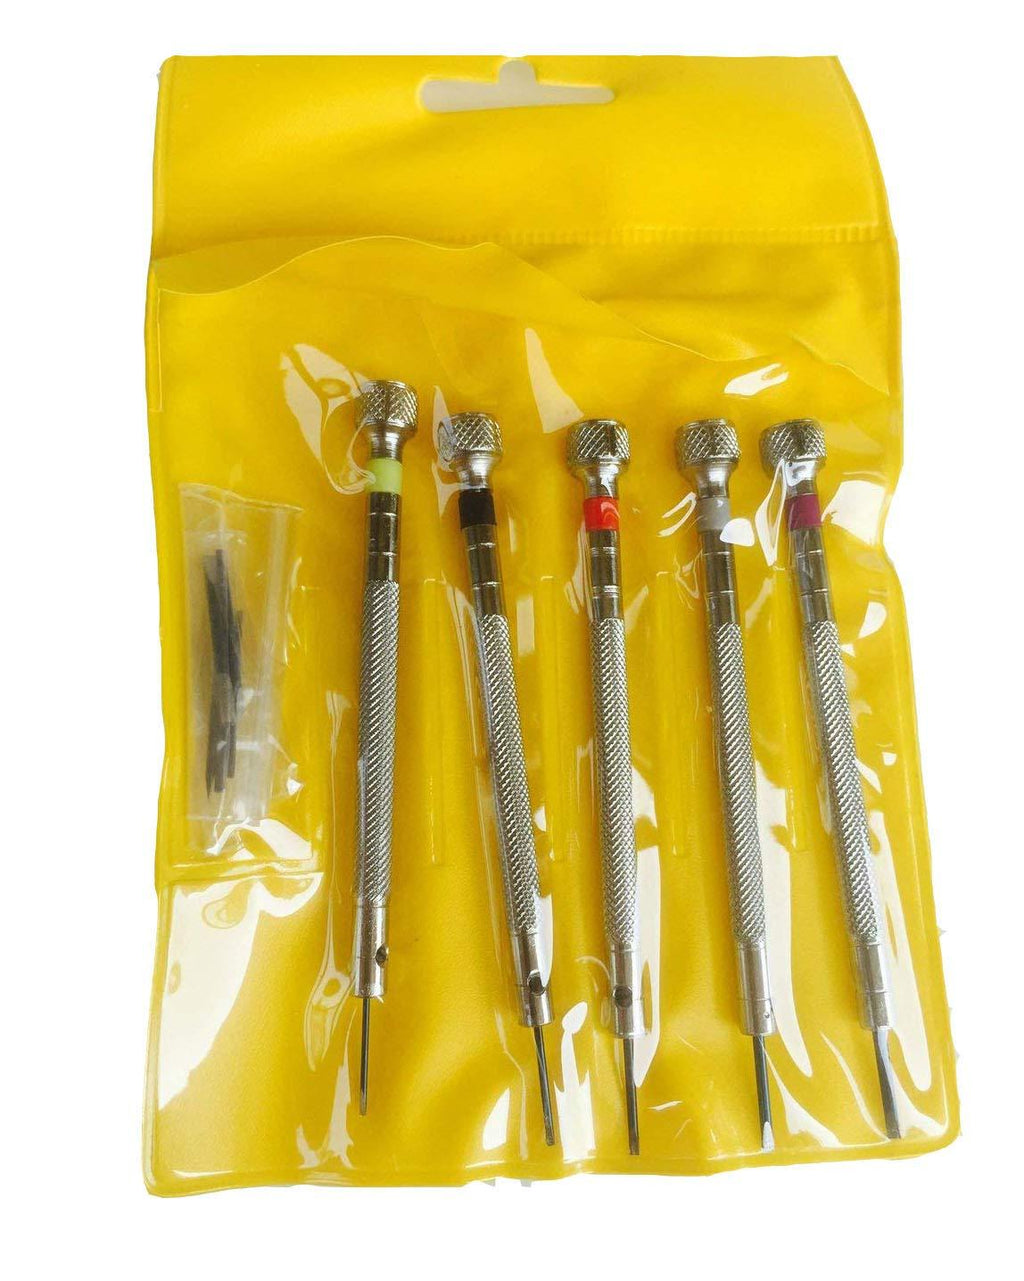 [Australia] - OTOOLWORLD 5 Pieces Precision Screwdriver Set for Watch Repair Watch Bracelet with 5 Extra Blades 